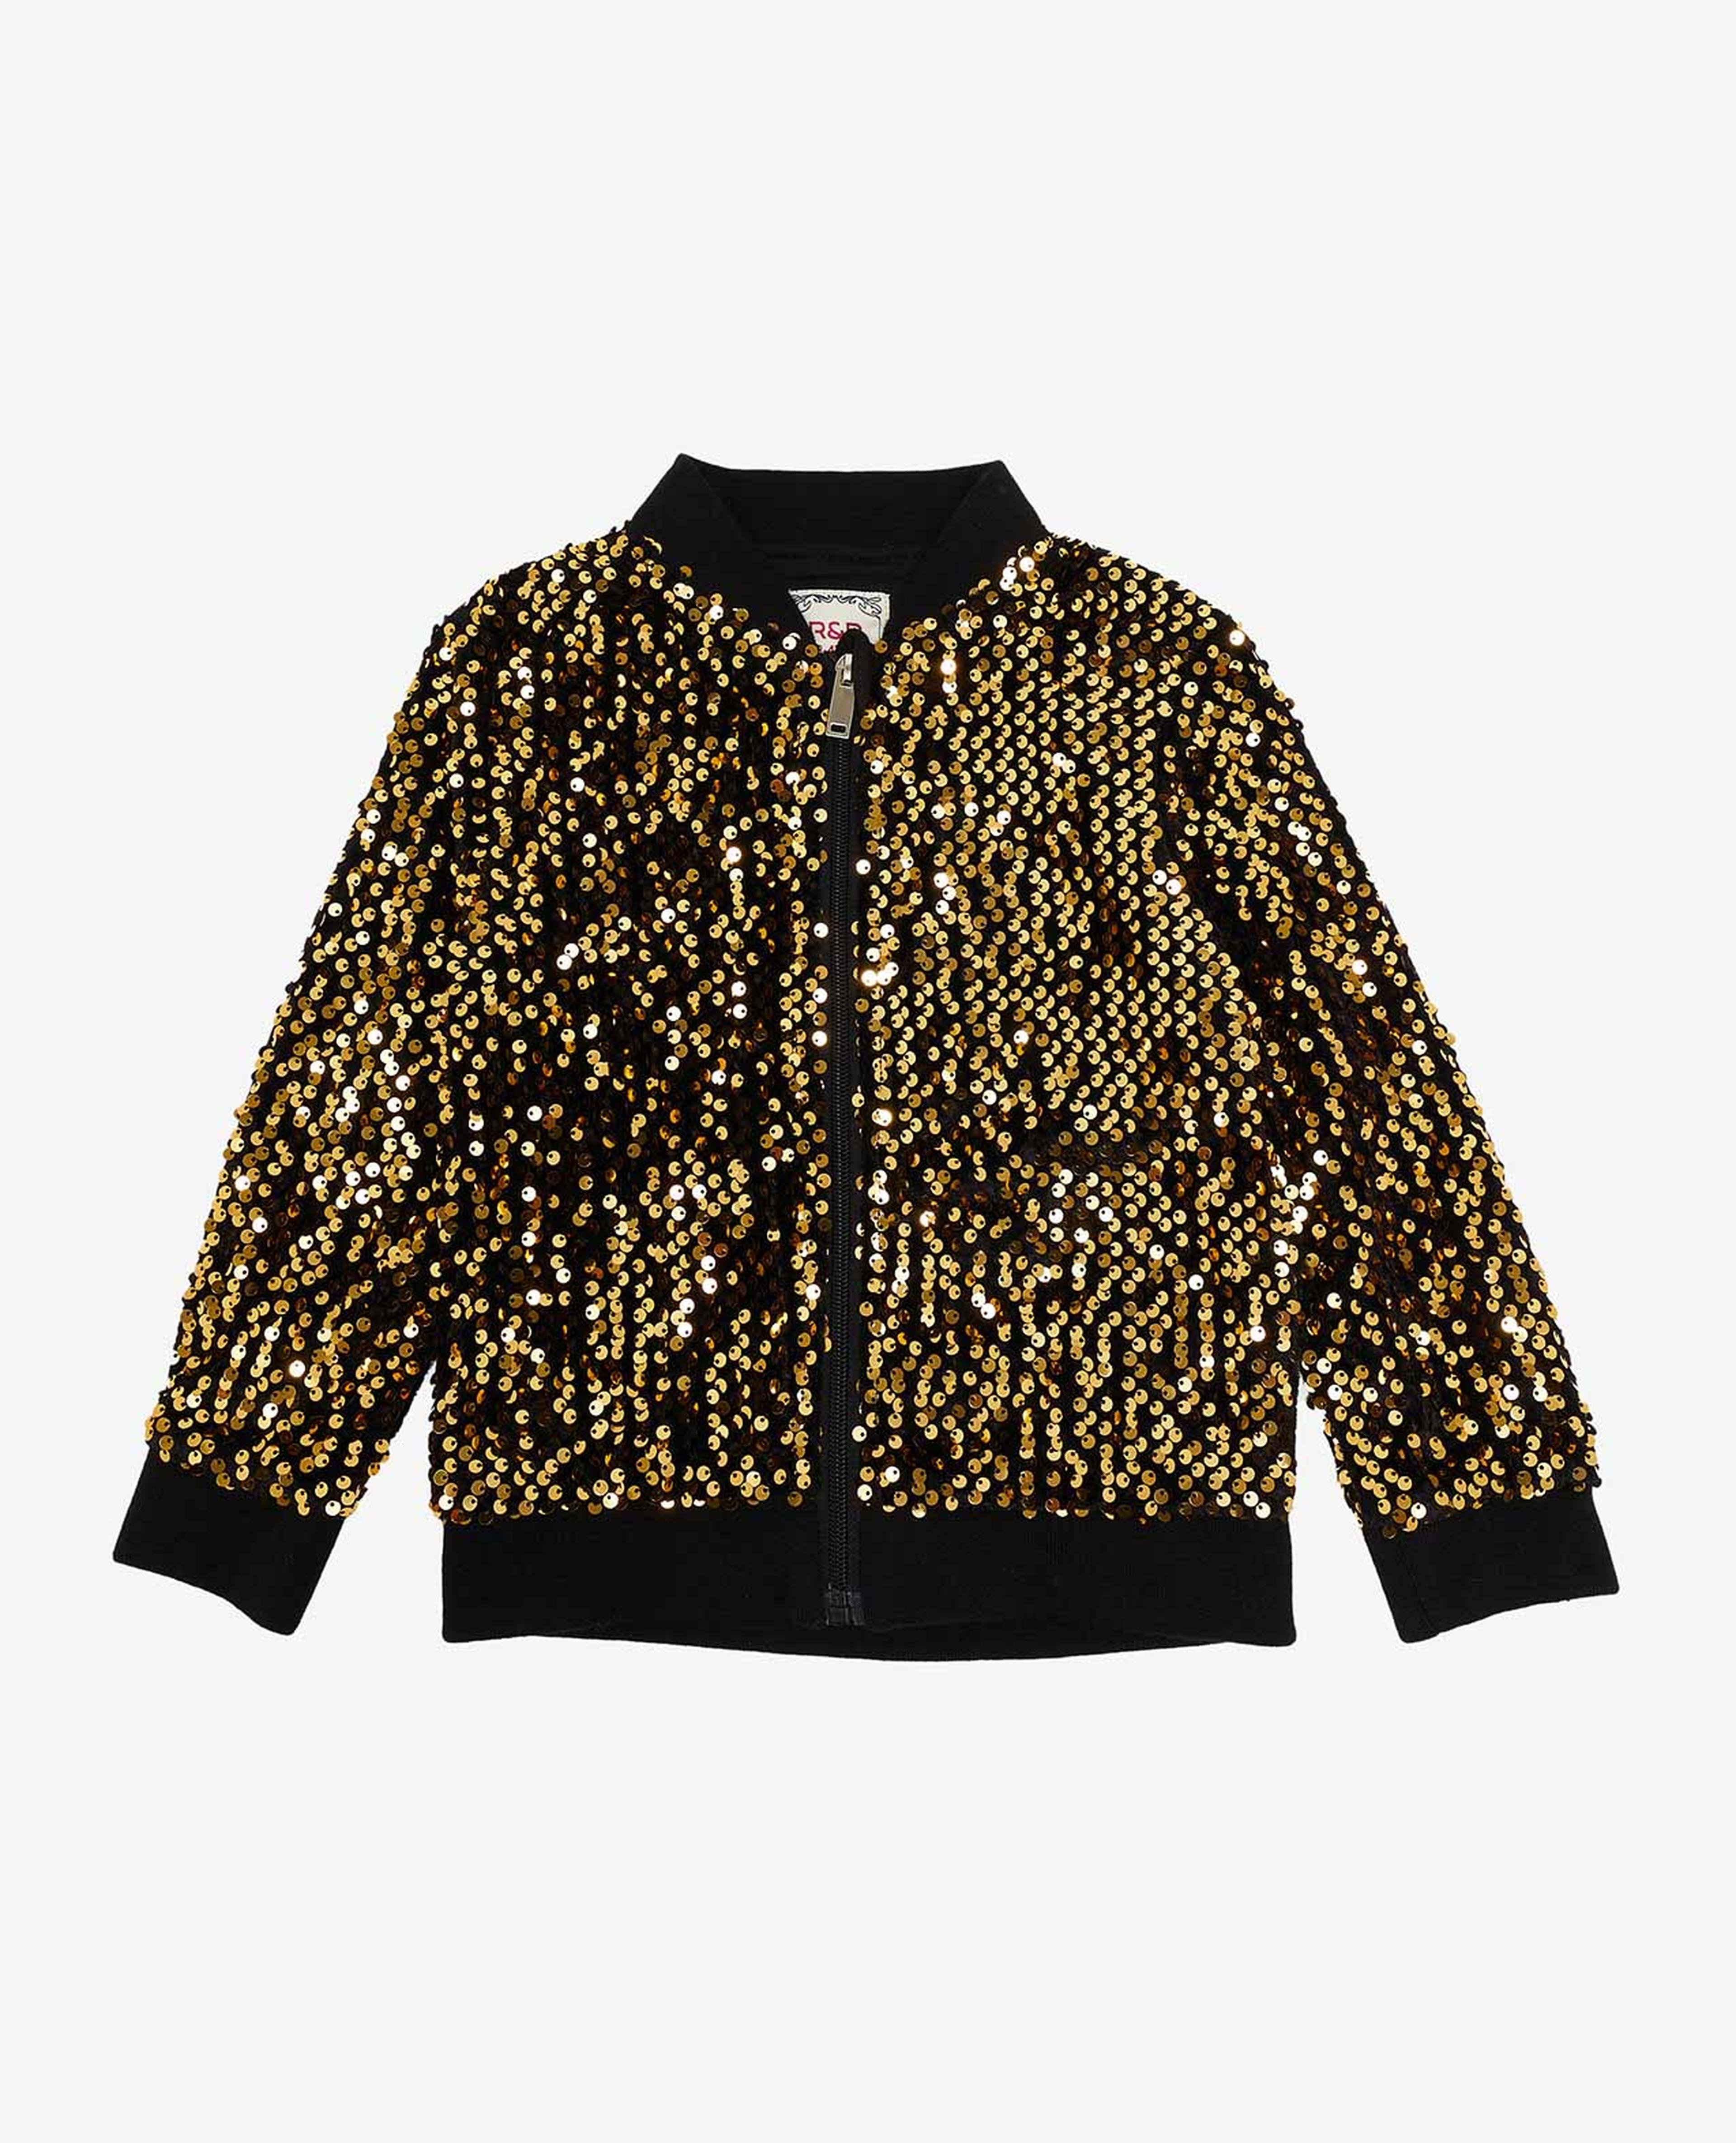 Sequins Embellished Jacket with Zippered Closure